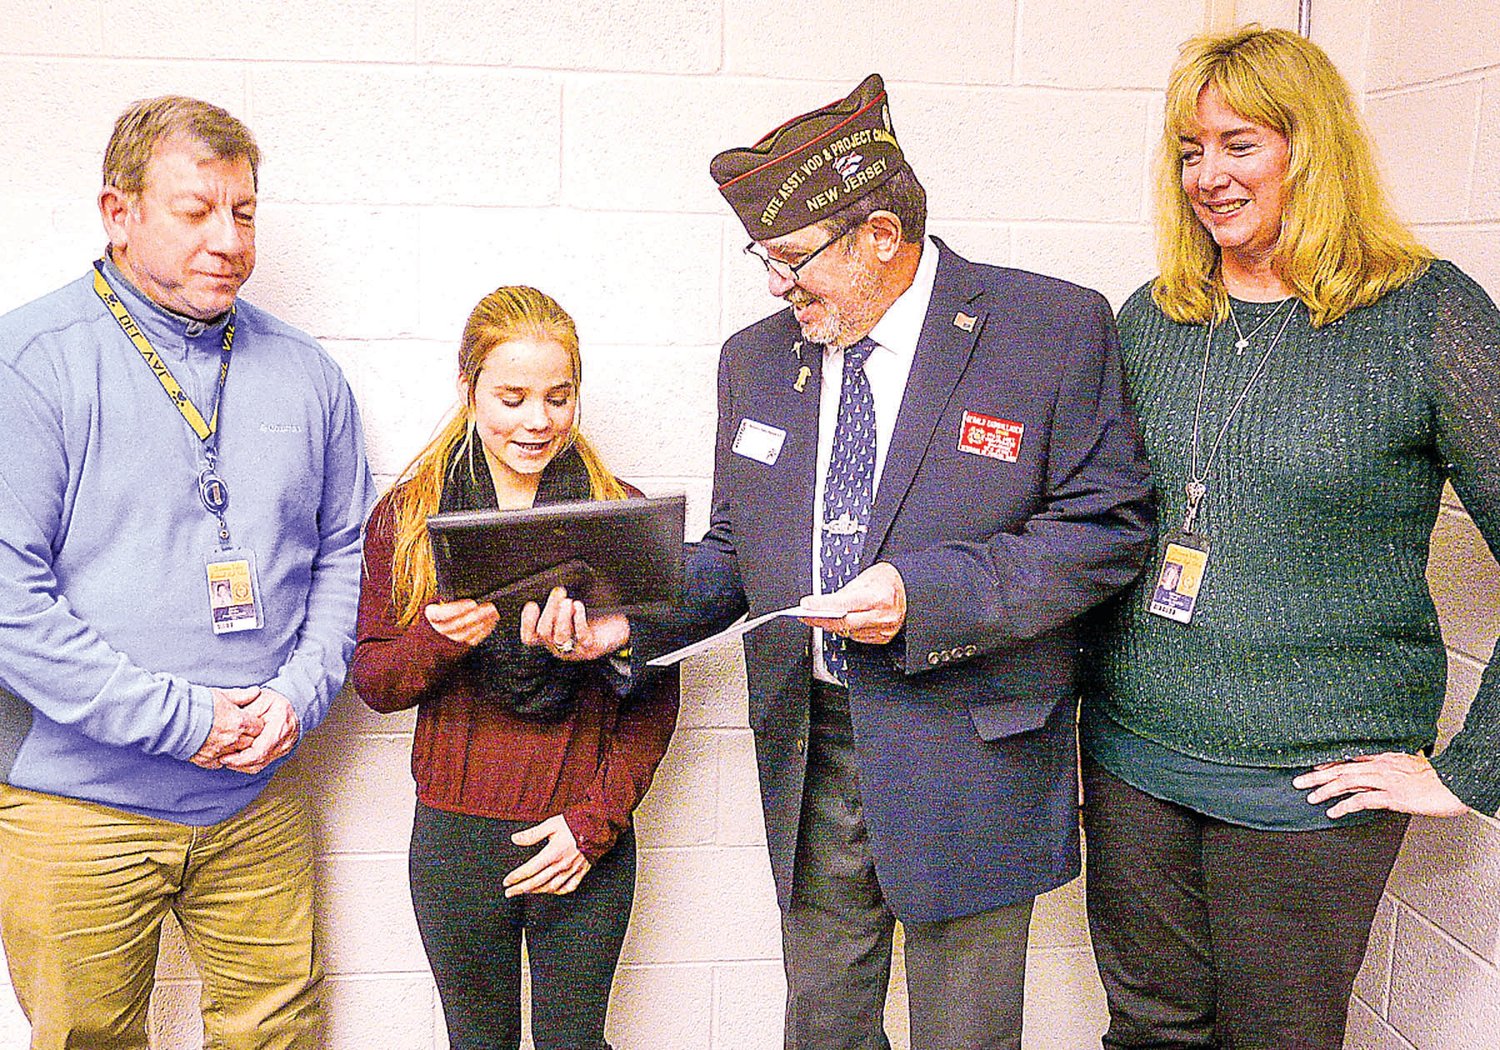 Gerald Cadwallader of the VFW presents Del Val High School sophomore Clare Erwin with a plaque and a check for winning the Hunterdon County Voice of Democracy competition. They are flanked by teacher Jim Kluska and Principal Adrienne Olcott.